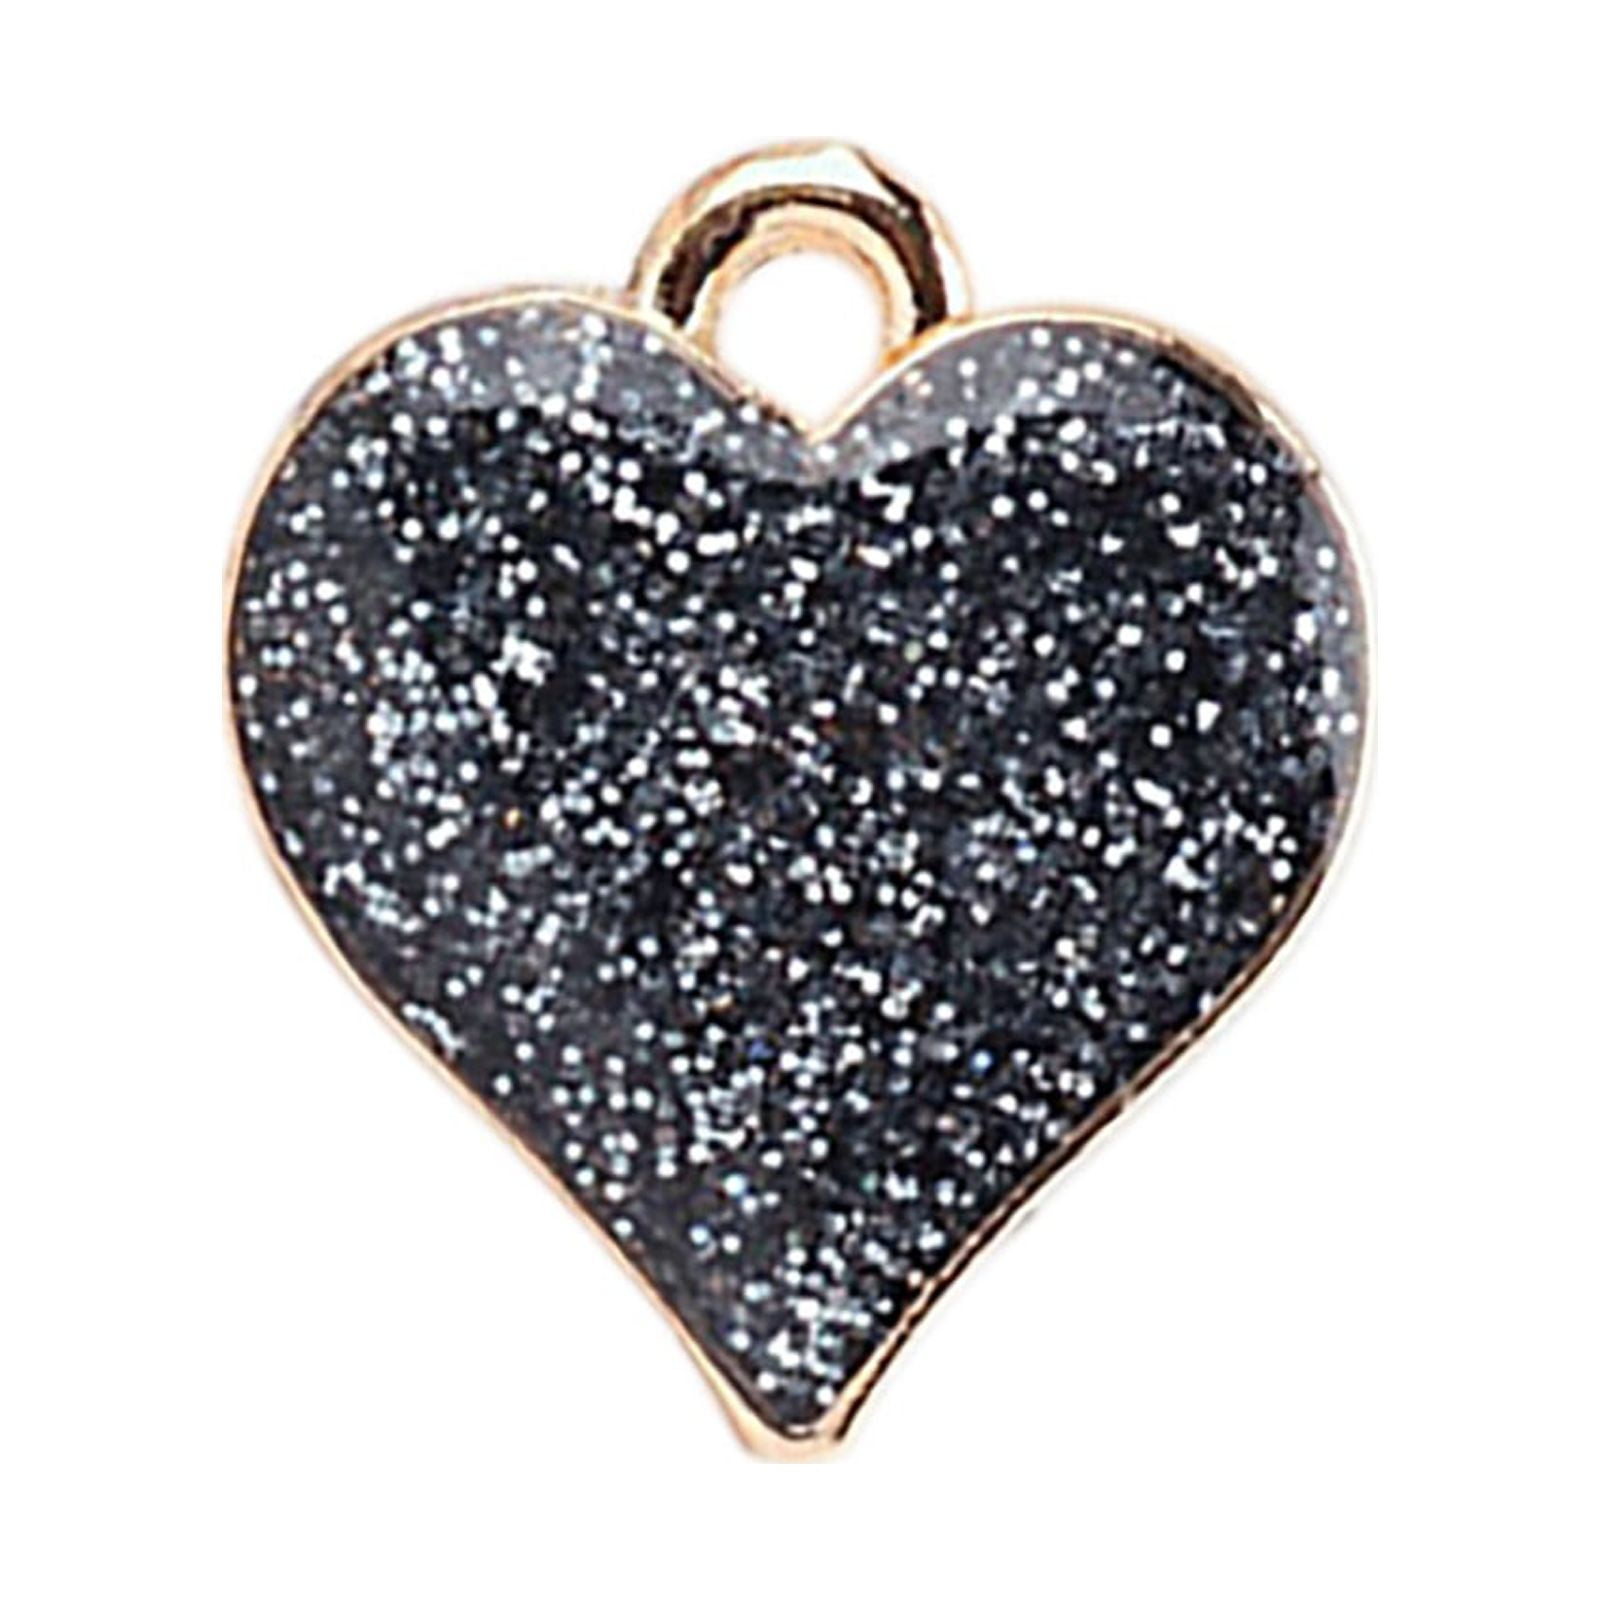 Daznico Heart Shape Charms Bling Charms for Jewelry Making Valentine's Day DIY Earring Bracelet Necklace, Adult Unisex, Size: One size, Black